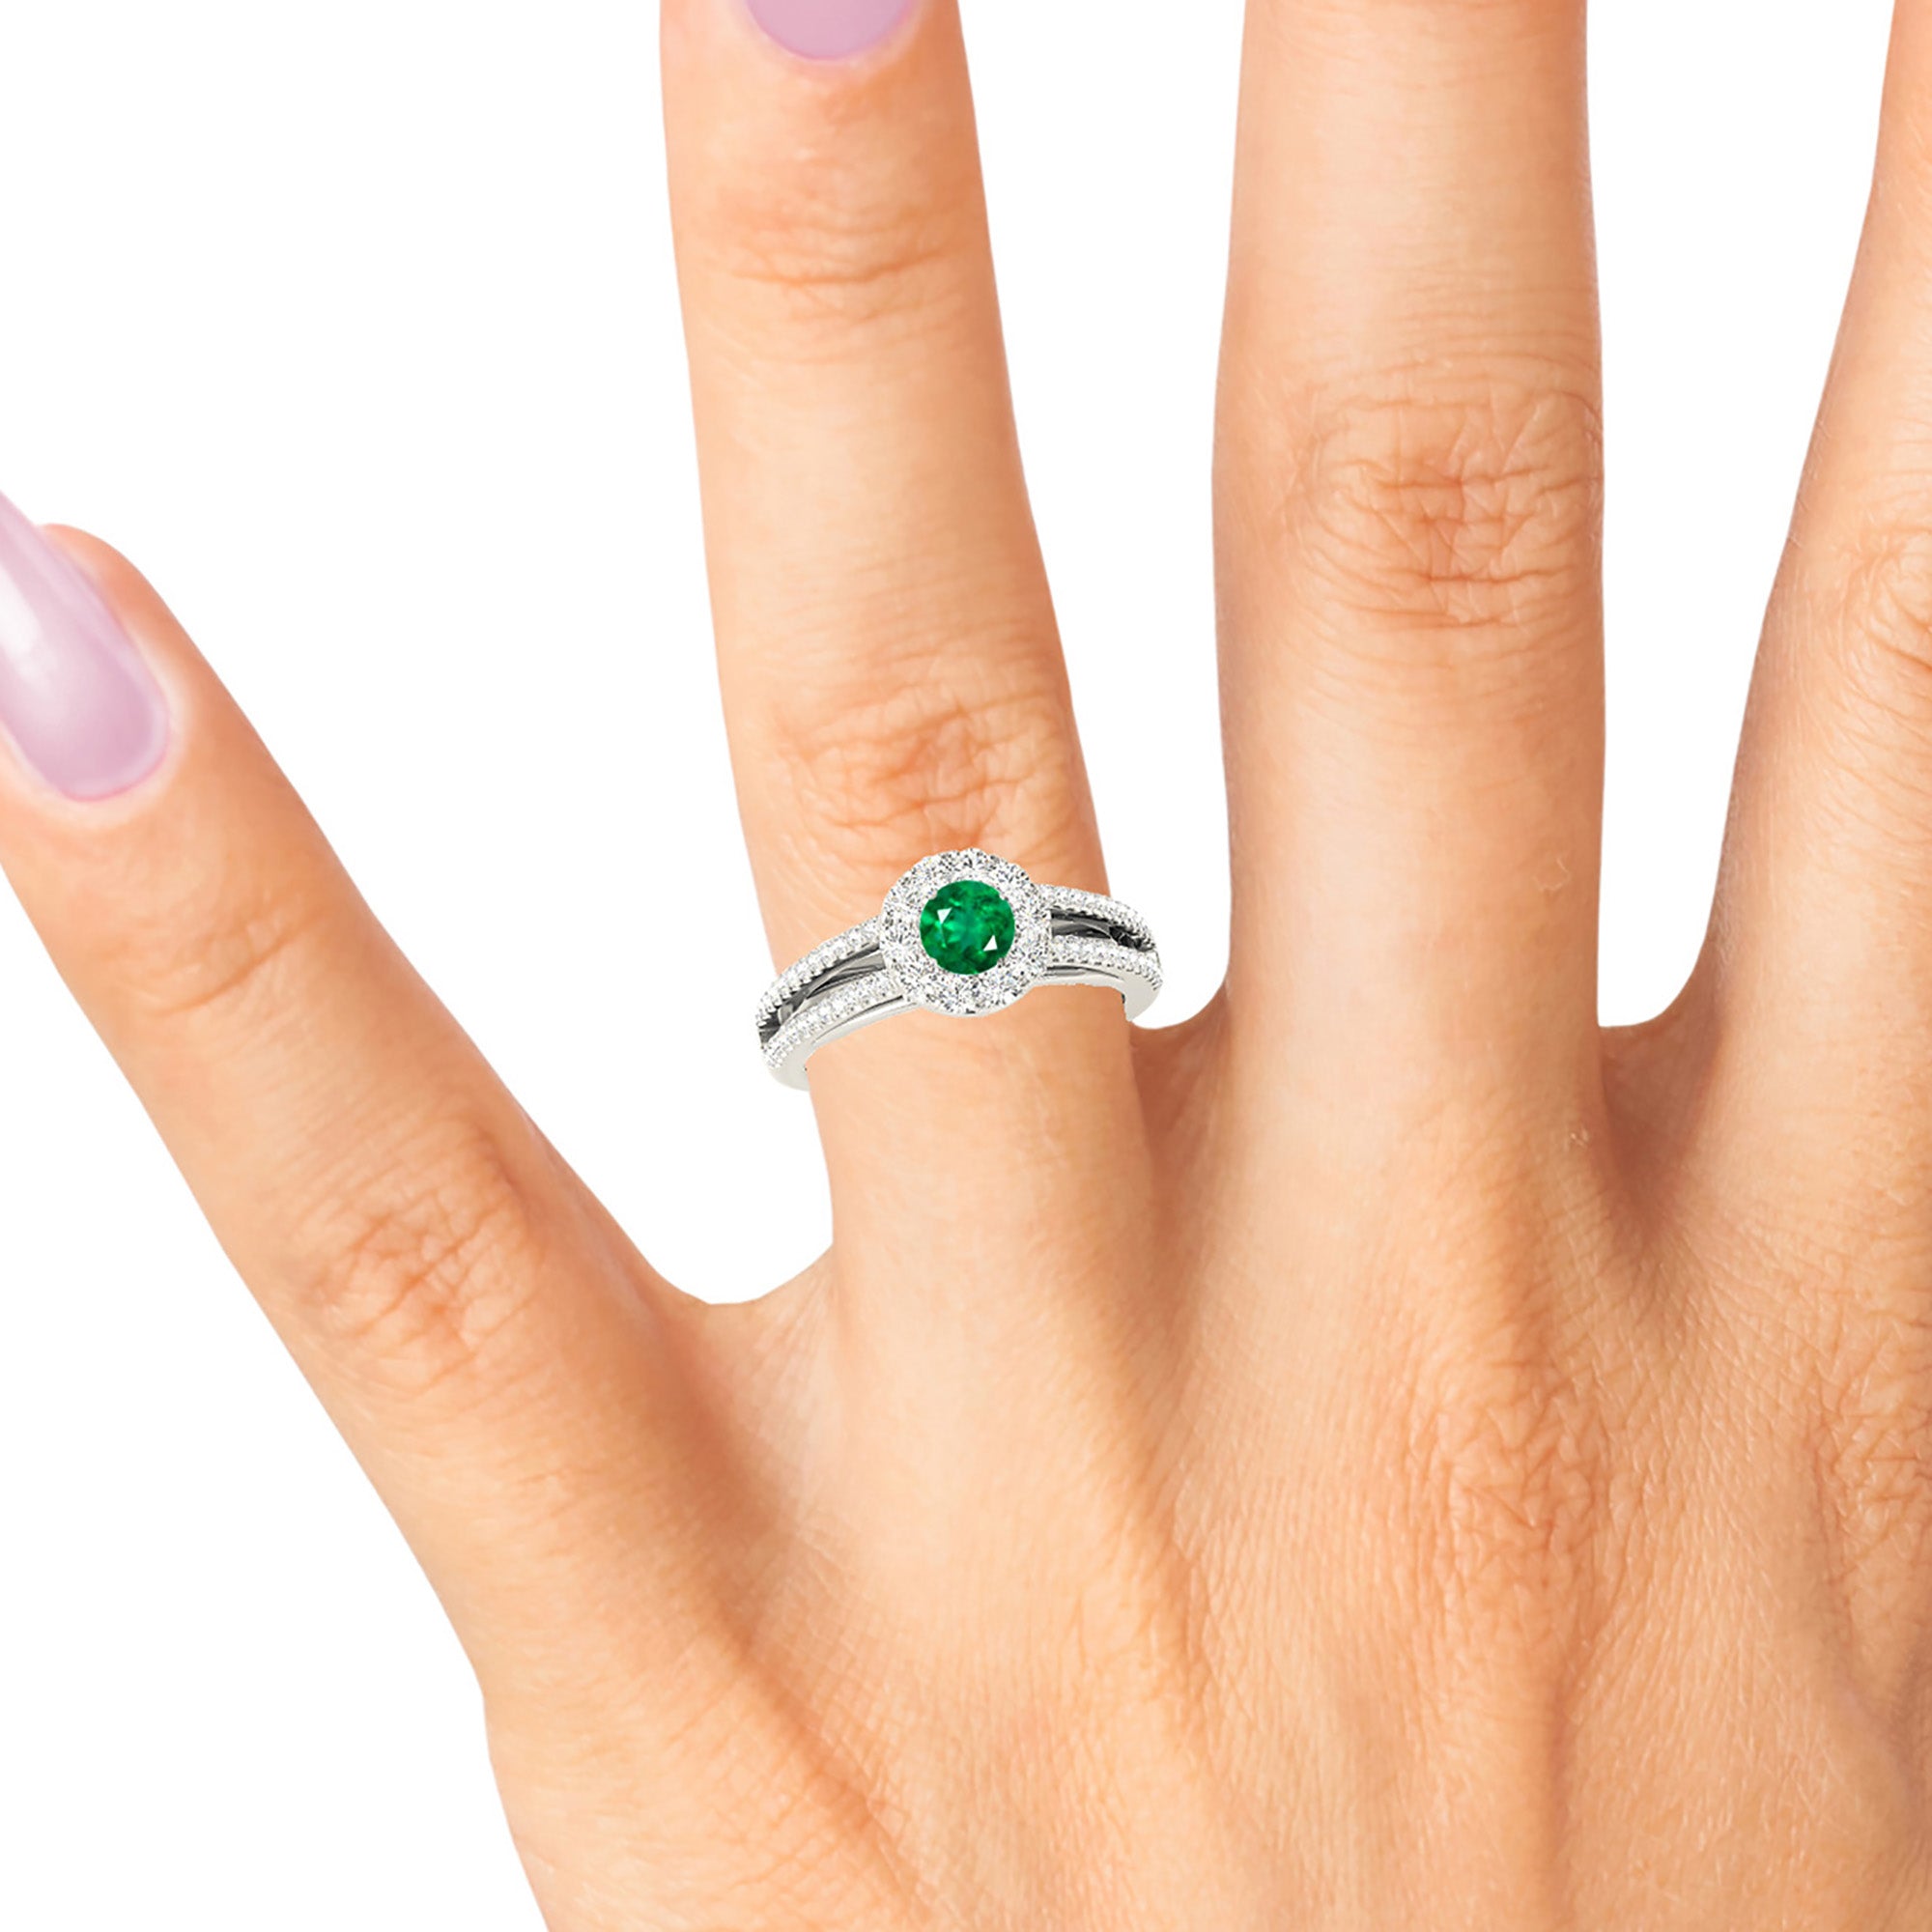 0.83 ct. Genuine Emerald Ring With 0.50 ctw. Diamond Halo And Split Band-in 14K/18K White, Yellow, Rose Gold and Platinum - Christmas Jewelry Gift -VIRABYANI